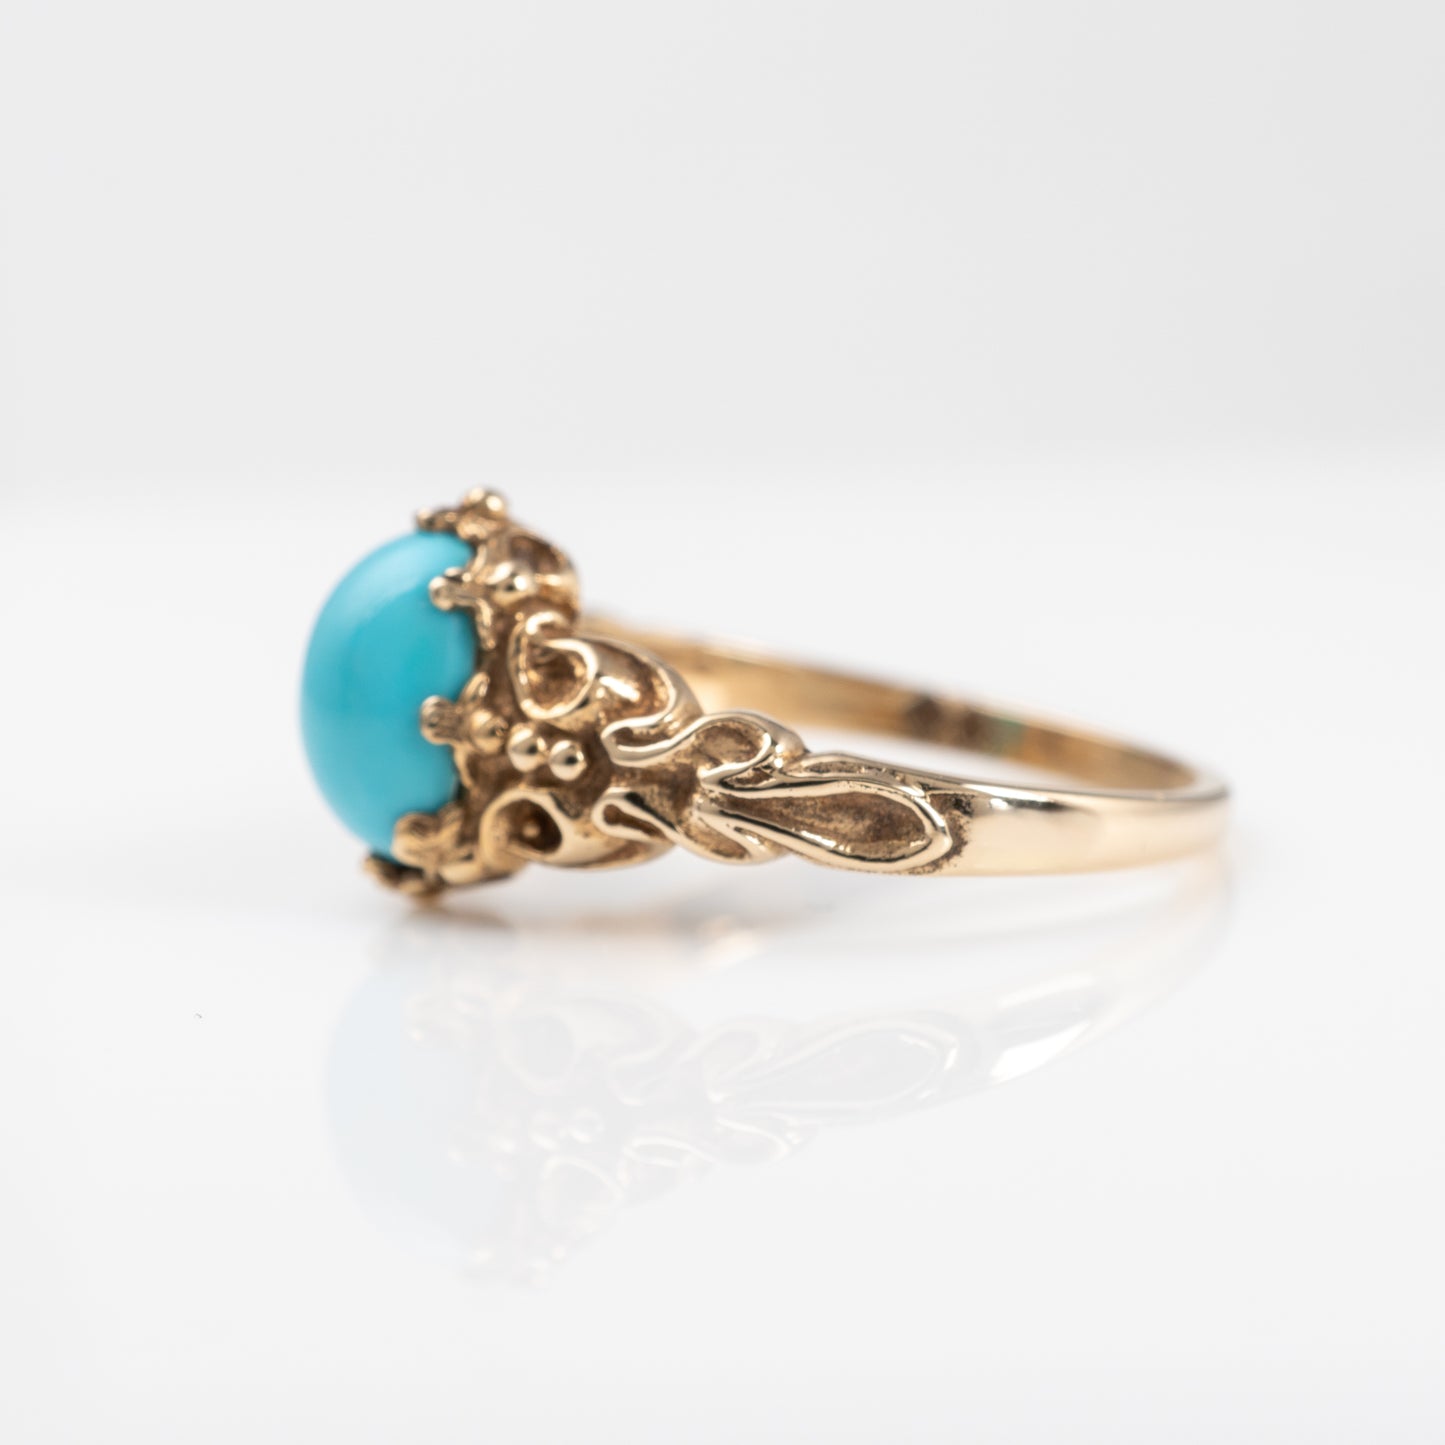 Vintage Rings UK - Turquoise Solitaire in Gold